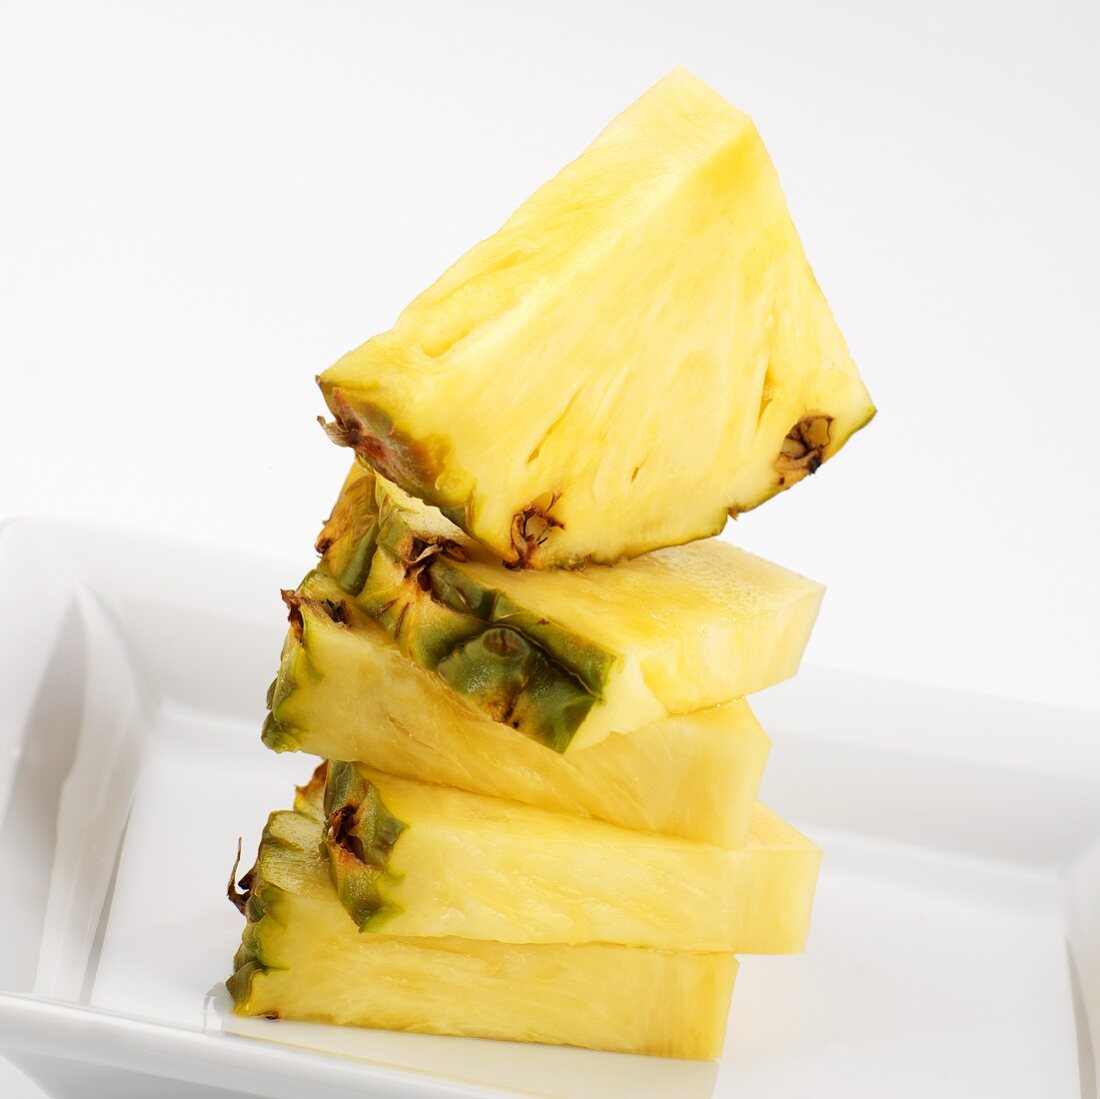 Pineapple quarters, stacked in white dish